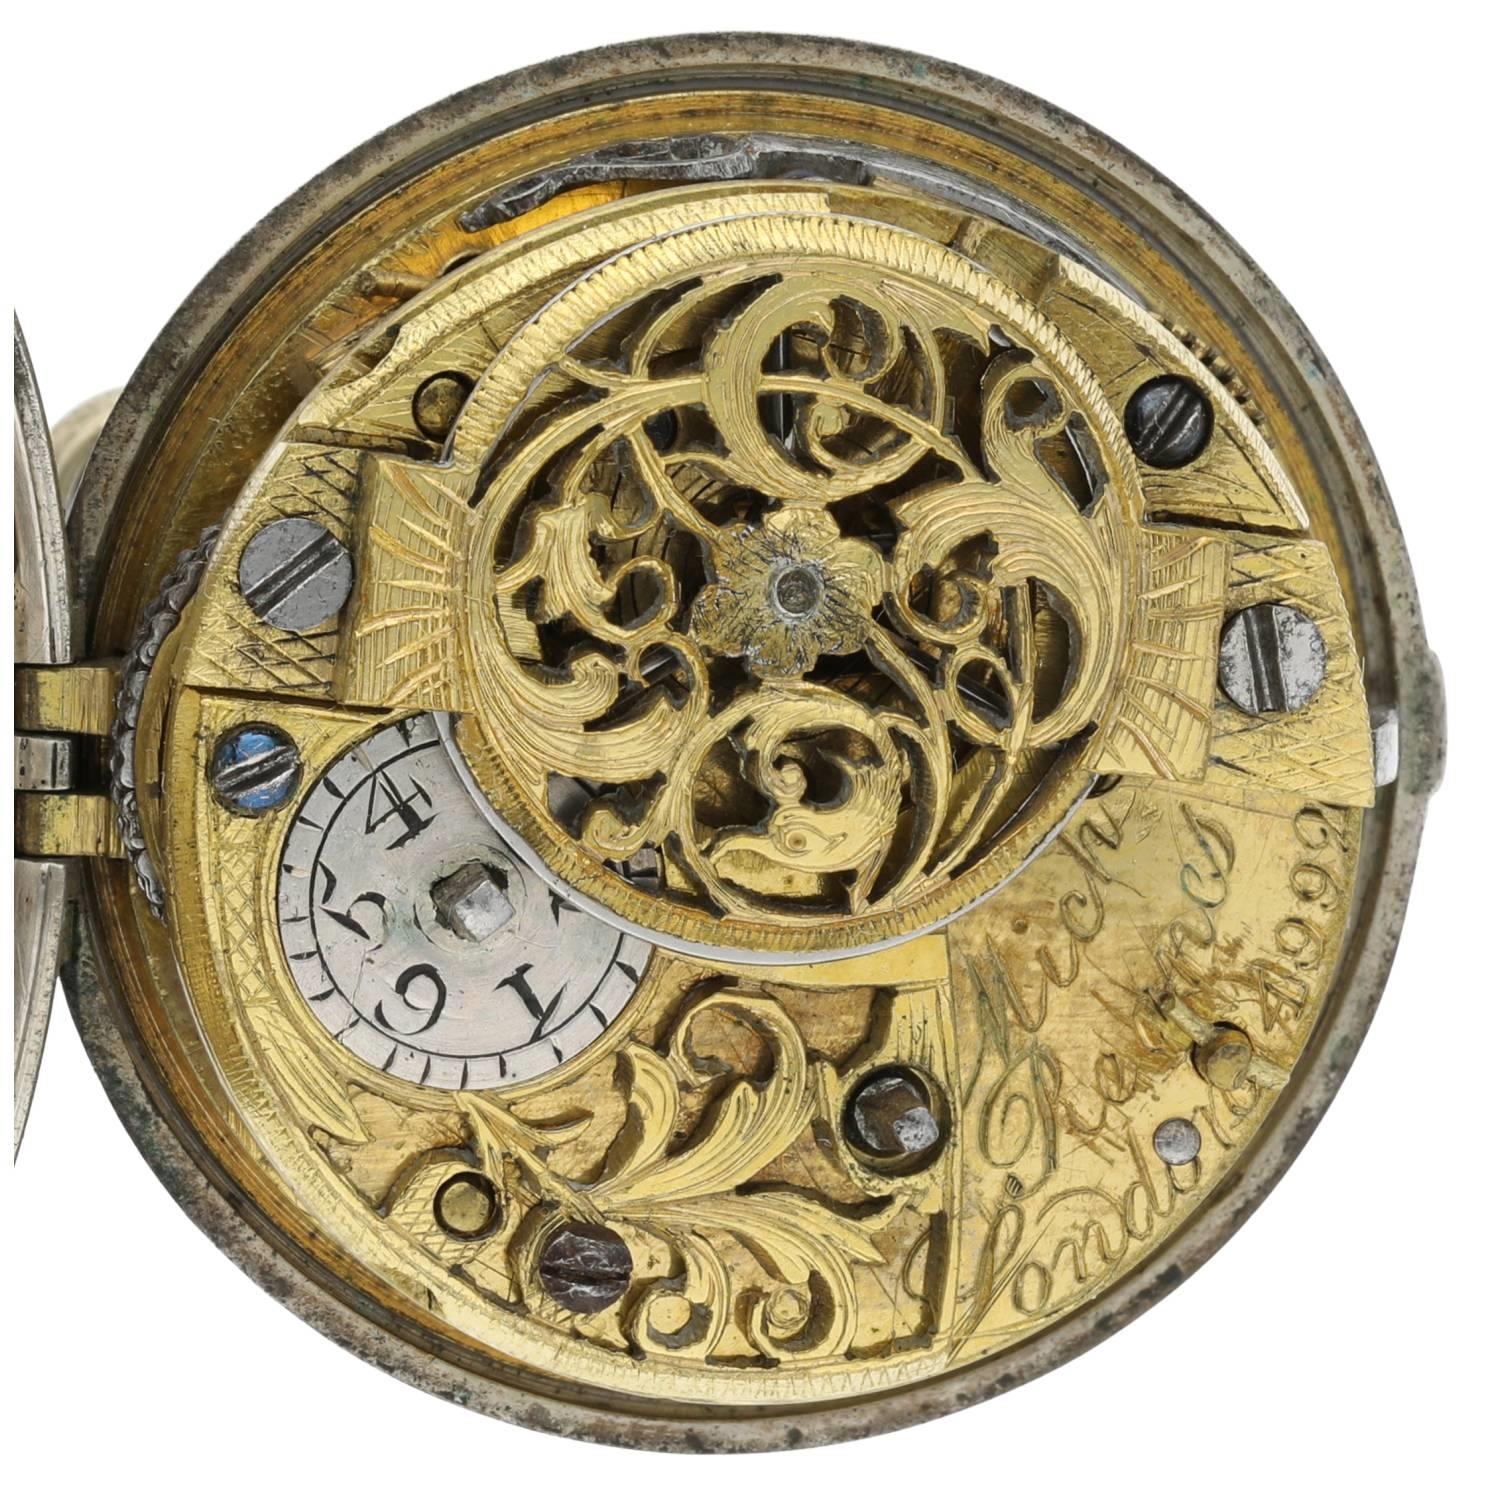 Mich Reanes, London - English 18th century repoussé silver pair cased verge pocket watch, London - Image 4 of 10